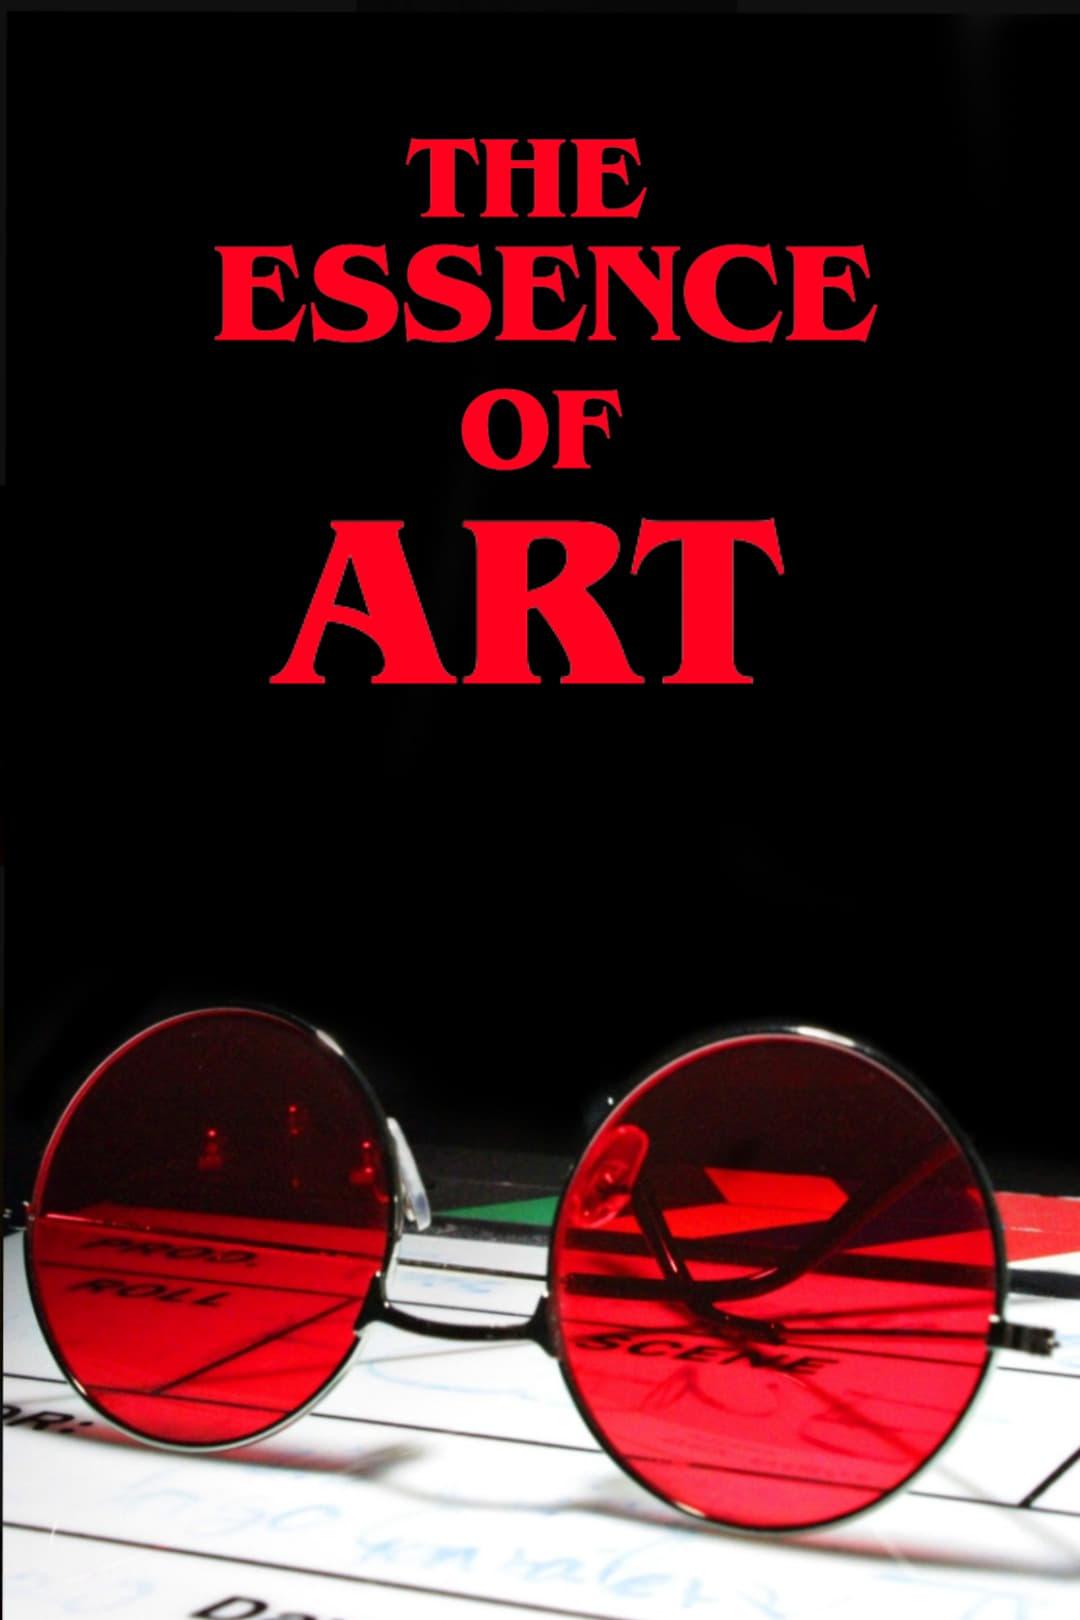 The Essence Of Art poster